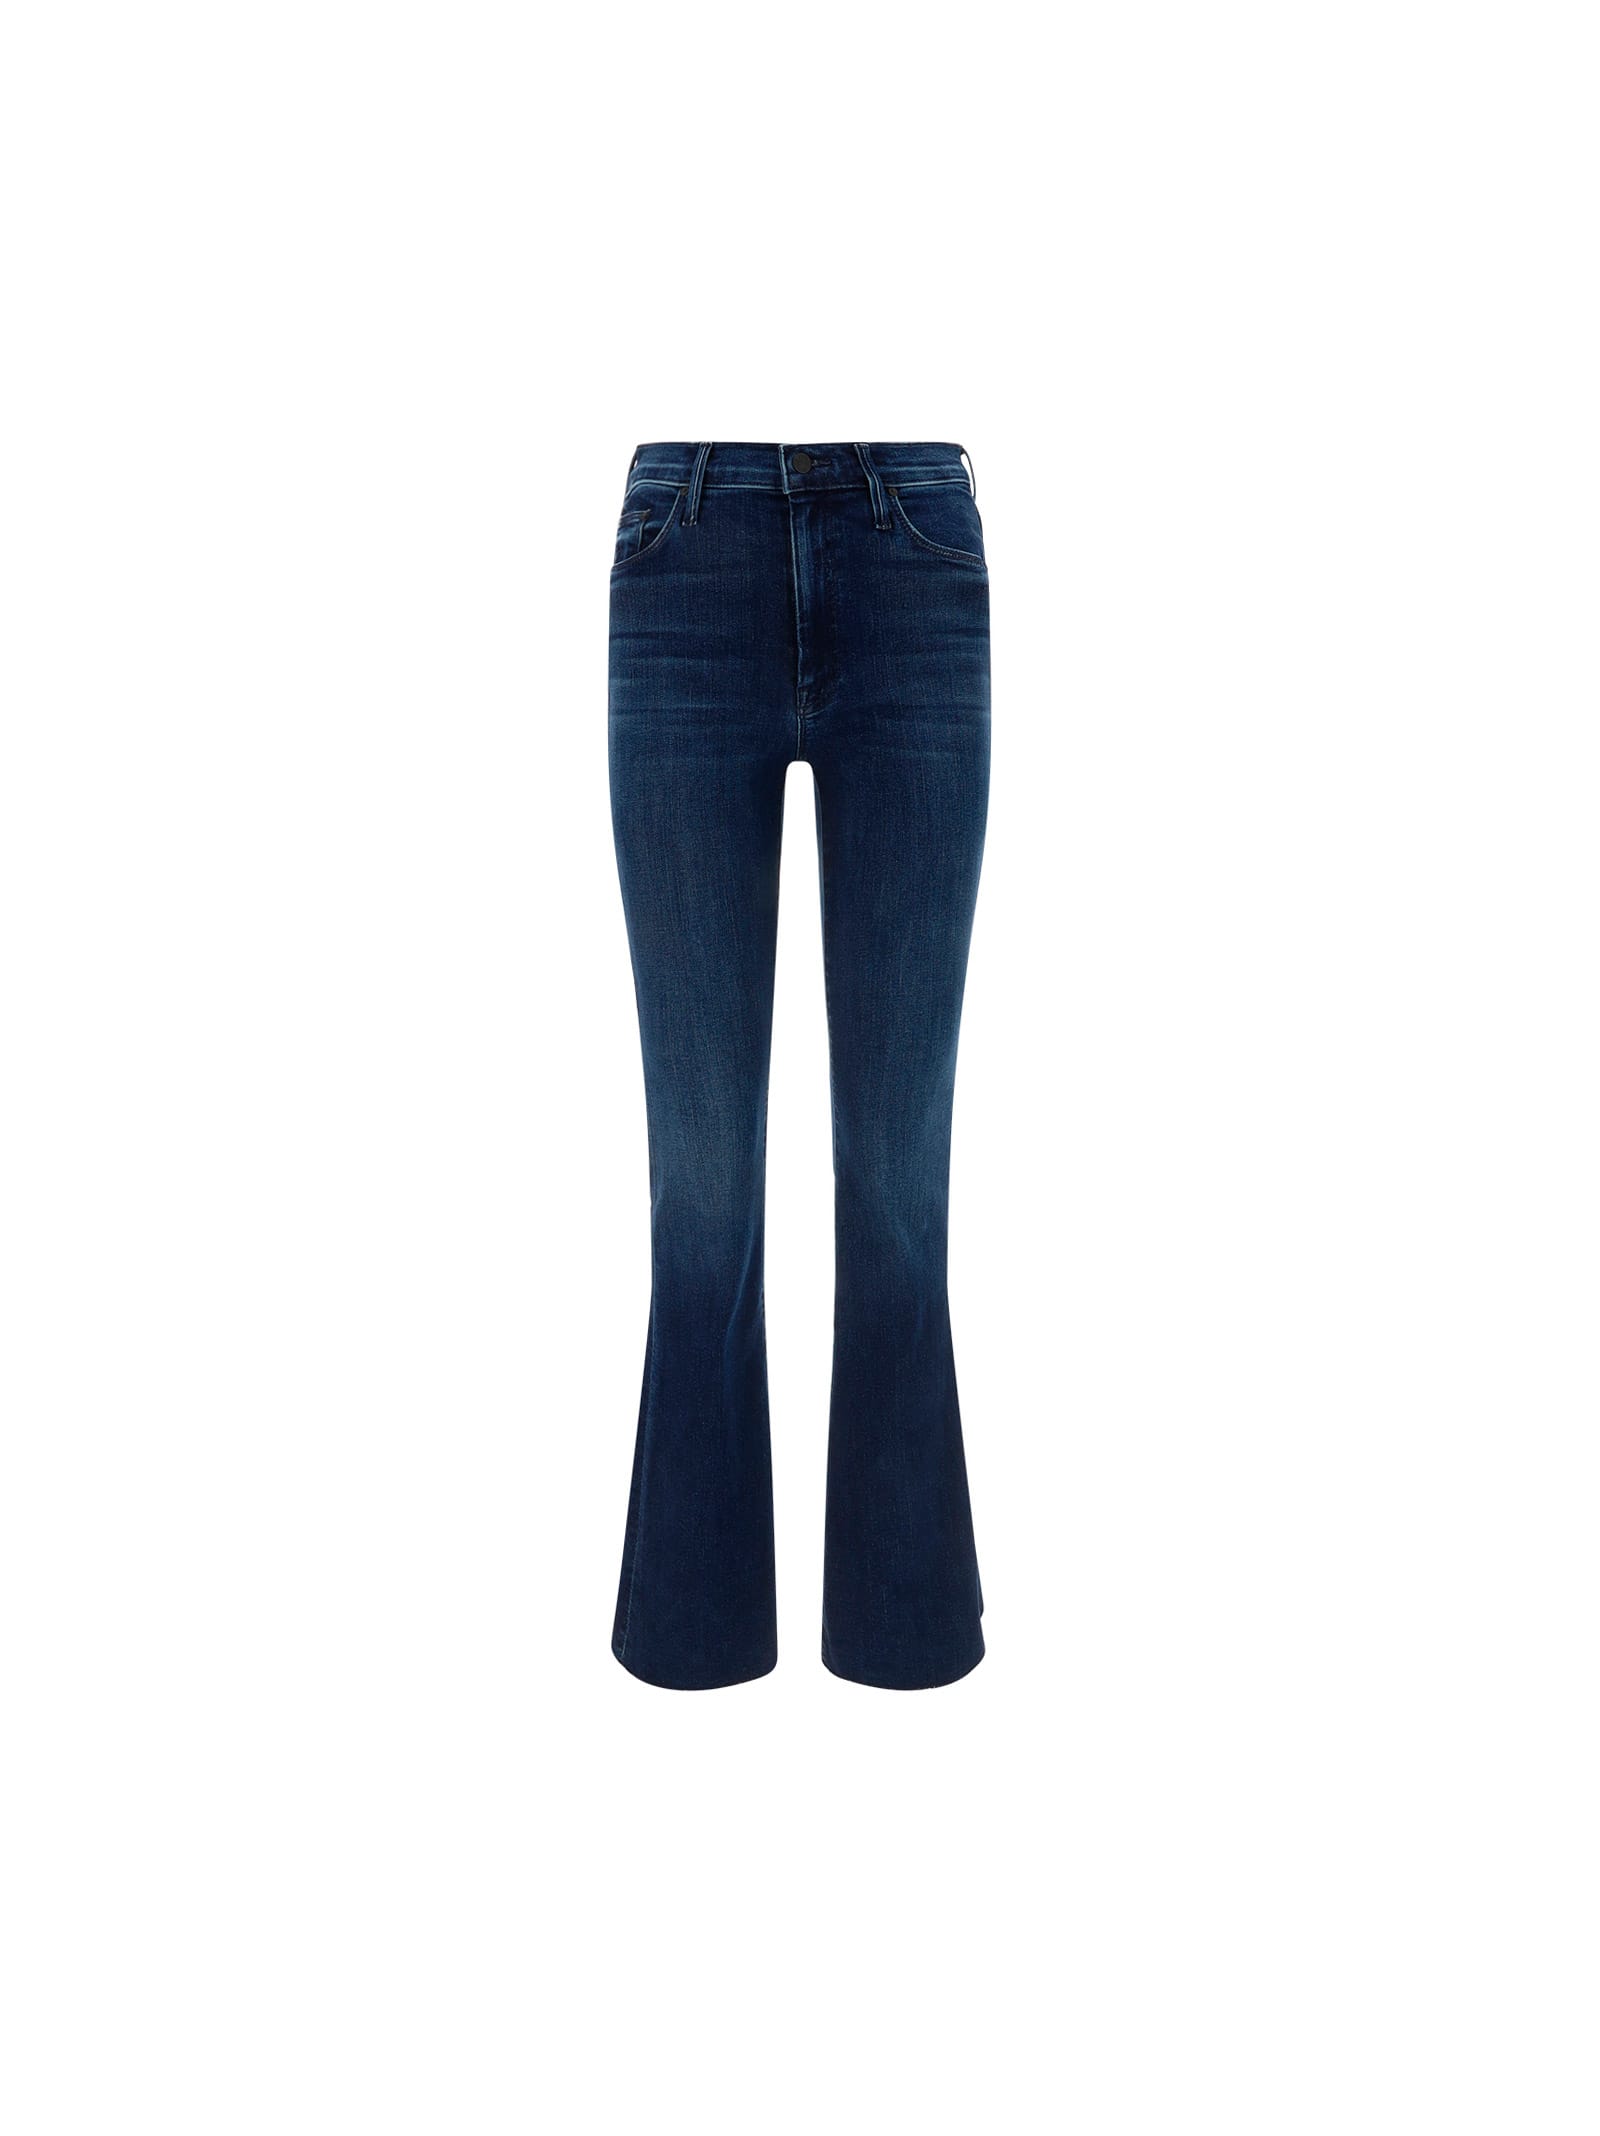 MOTHER WEEKENDER FRAY JEANS